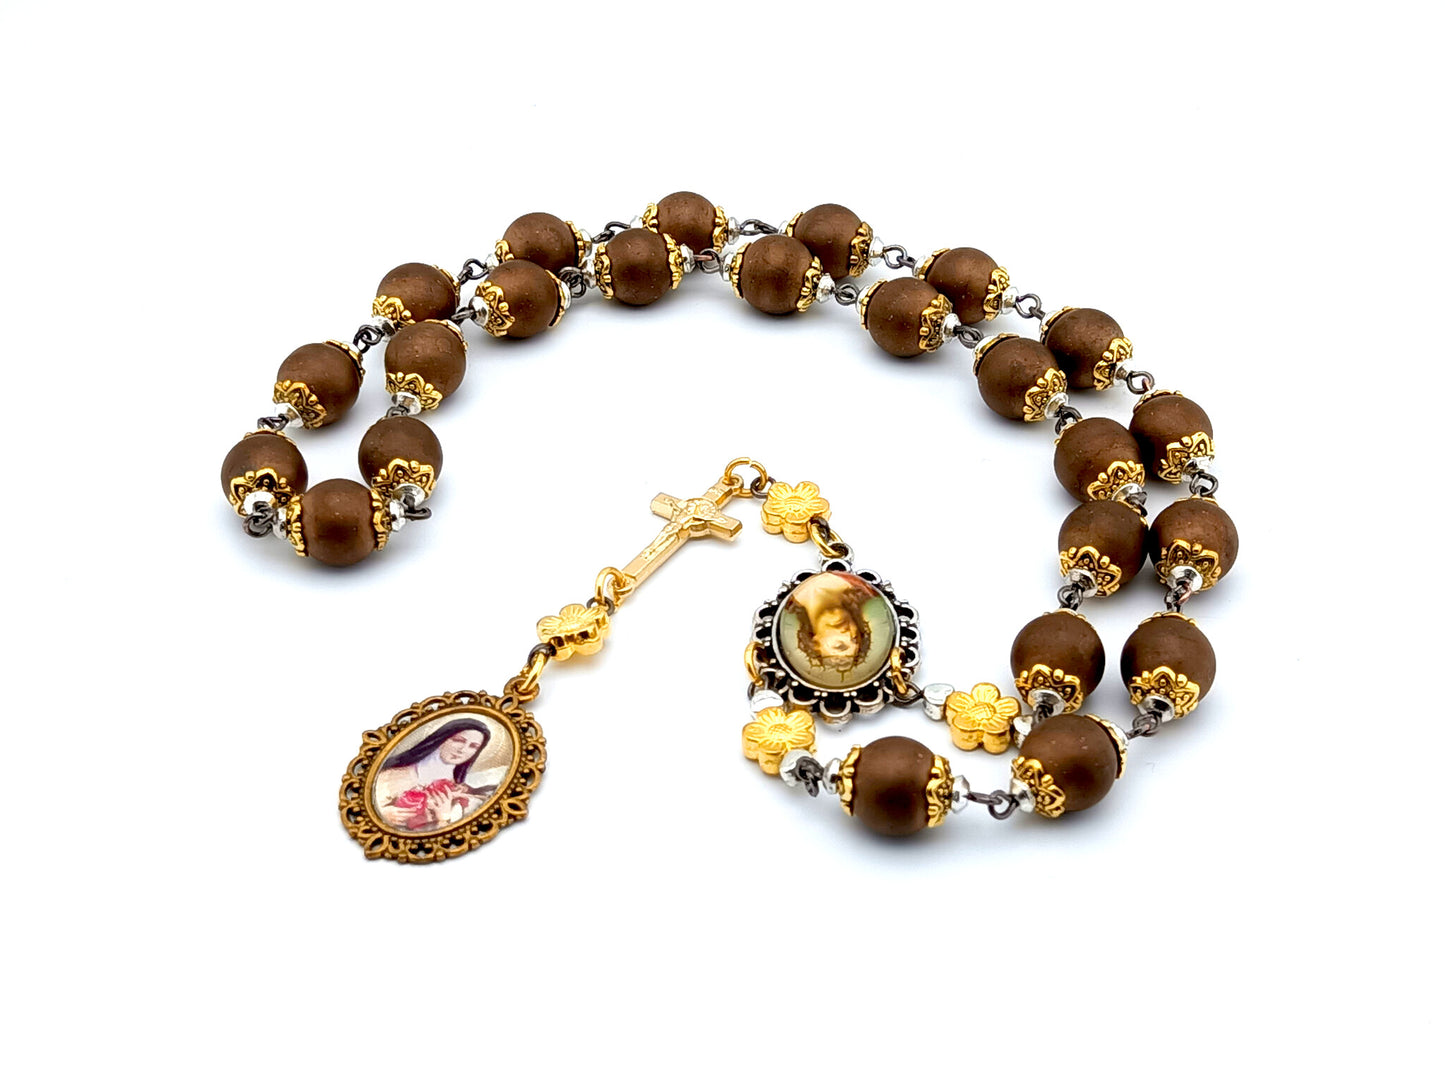 Saint Therese of Lisieux unique rosary beads prayer chaplet  with bronze glass and golden flower beads, golden crucifix and silver and gold picture centre and end medals.